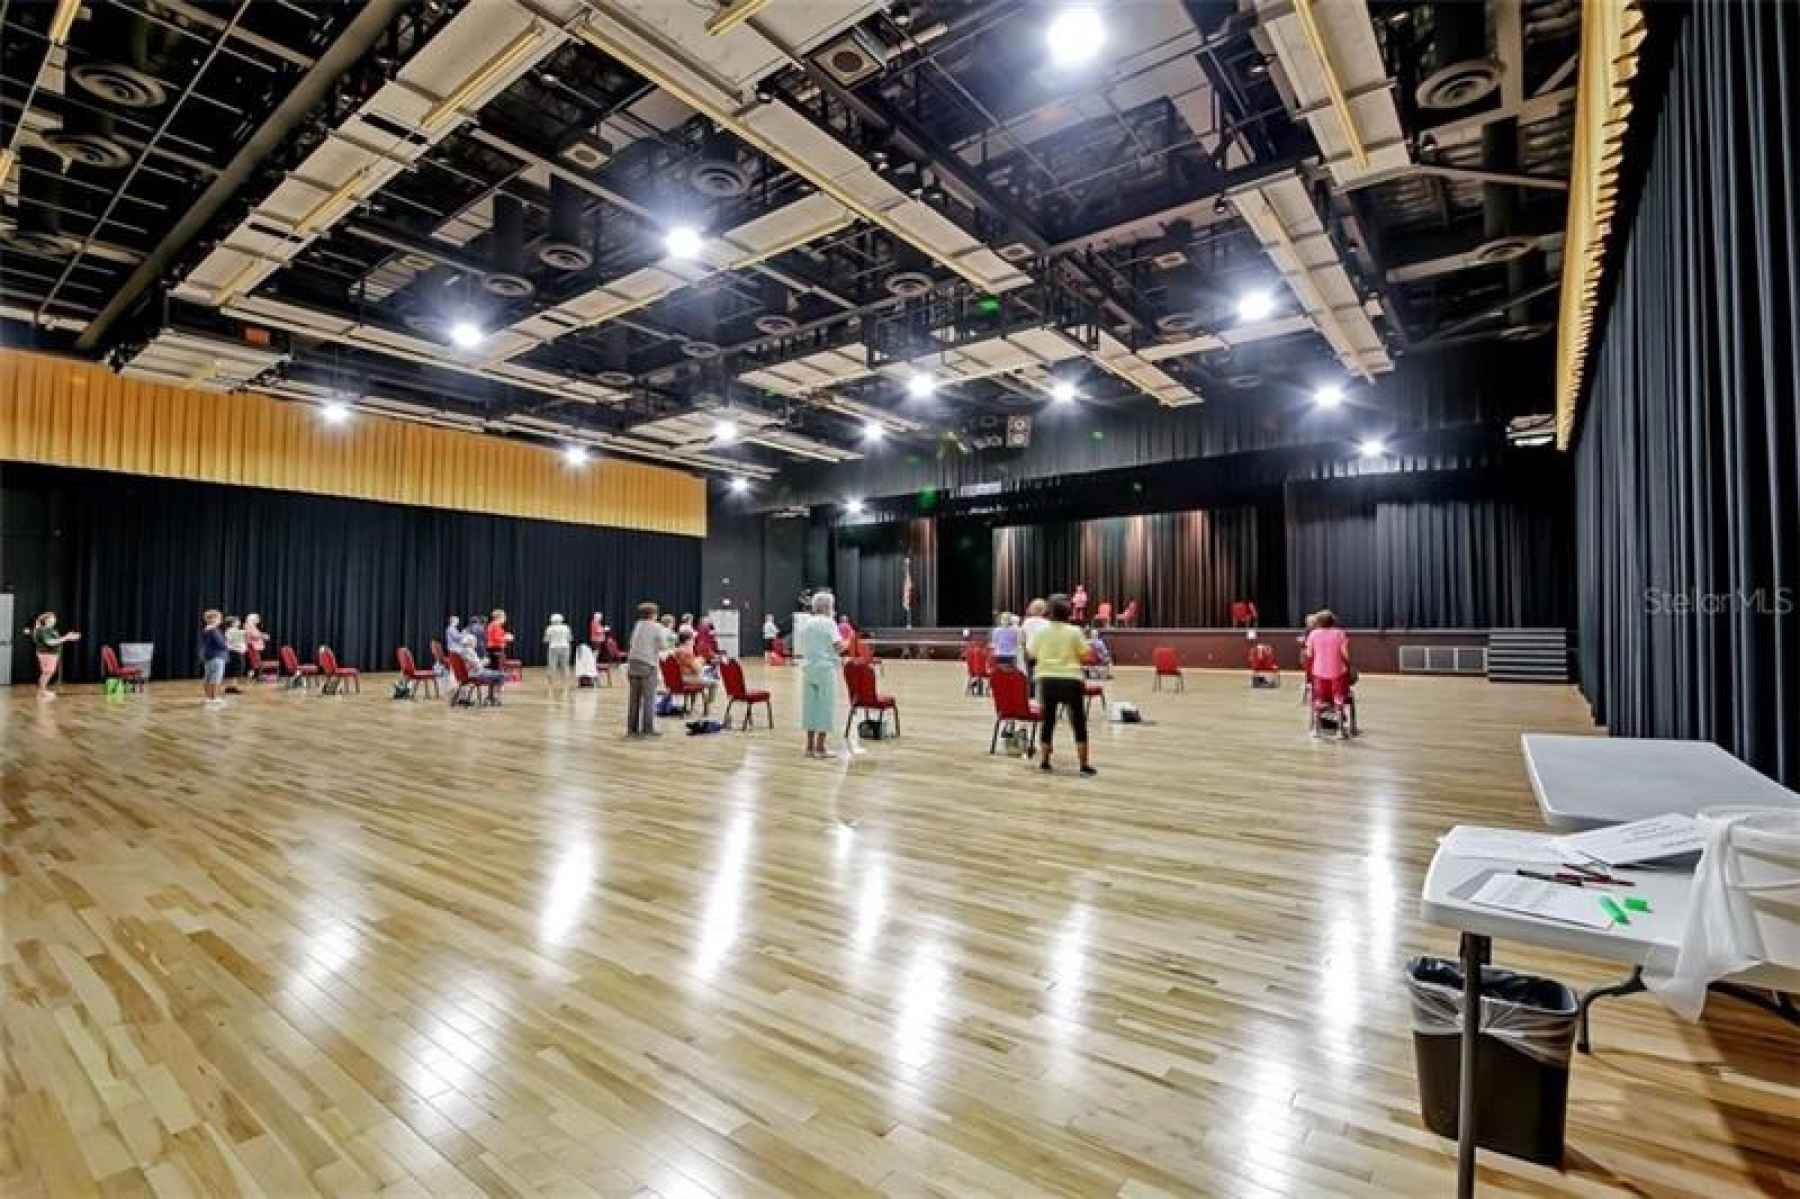 Exercise class going on in the large auditorium